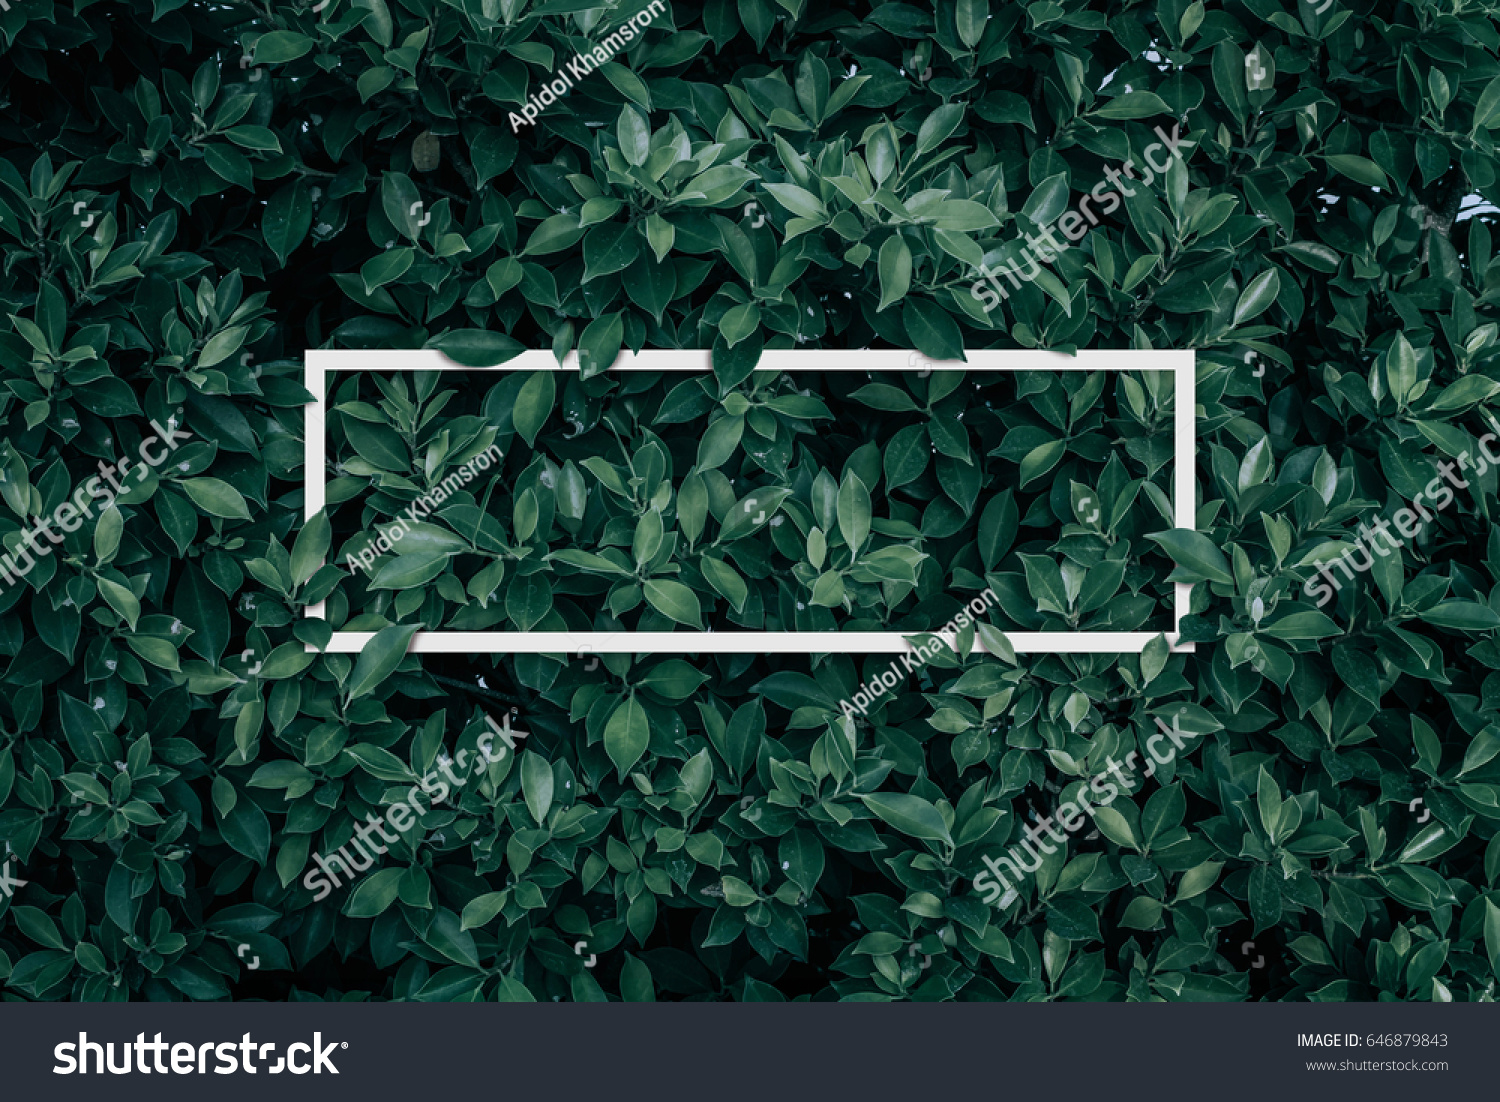 Square frame, Creative layout made with green leaves background. Blank for advertising card or invitation. Nature concept. Summer poster. #646879843